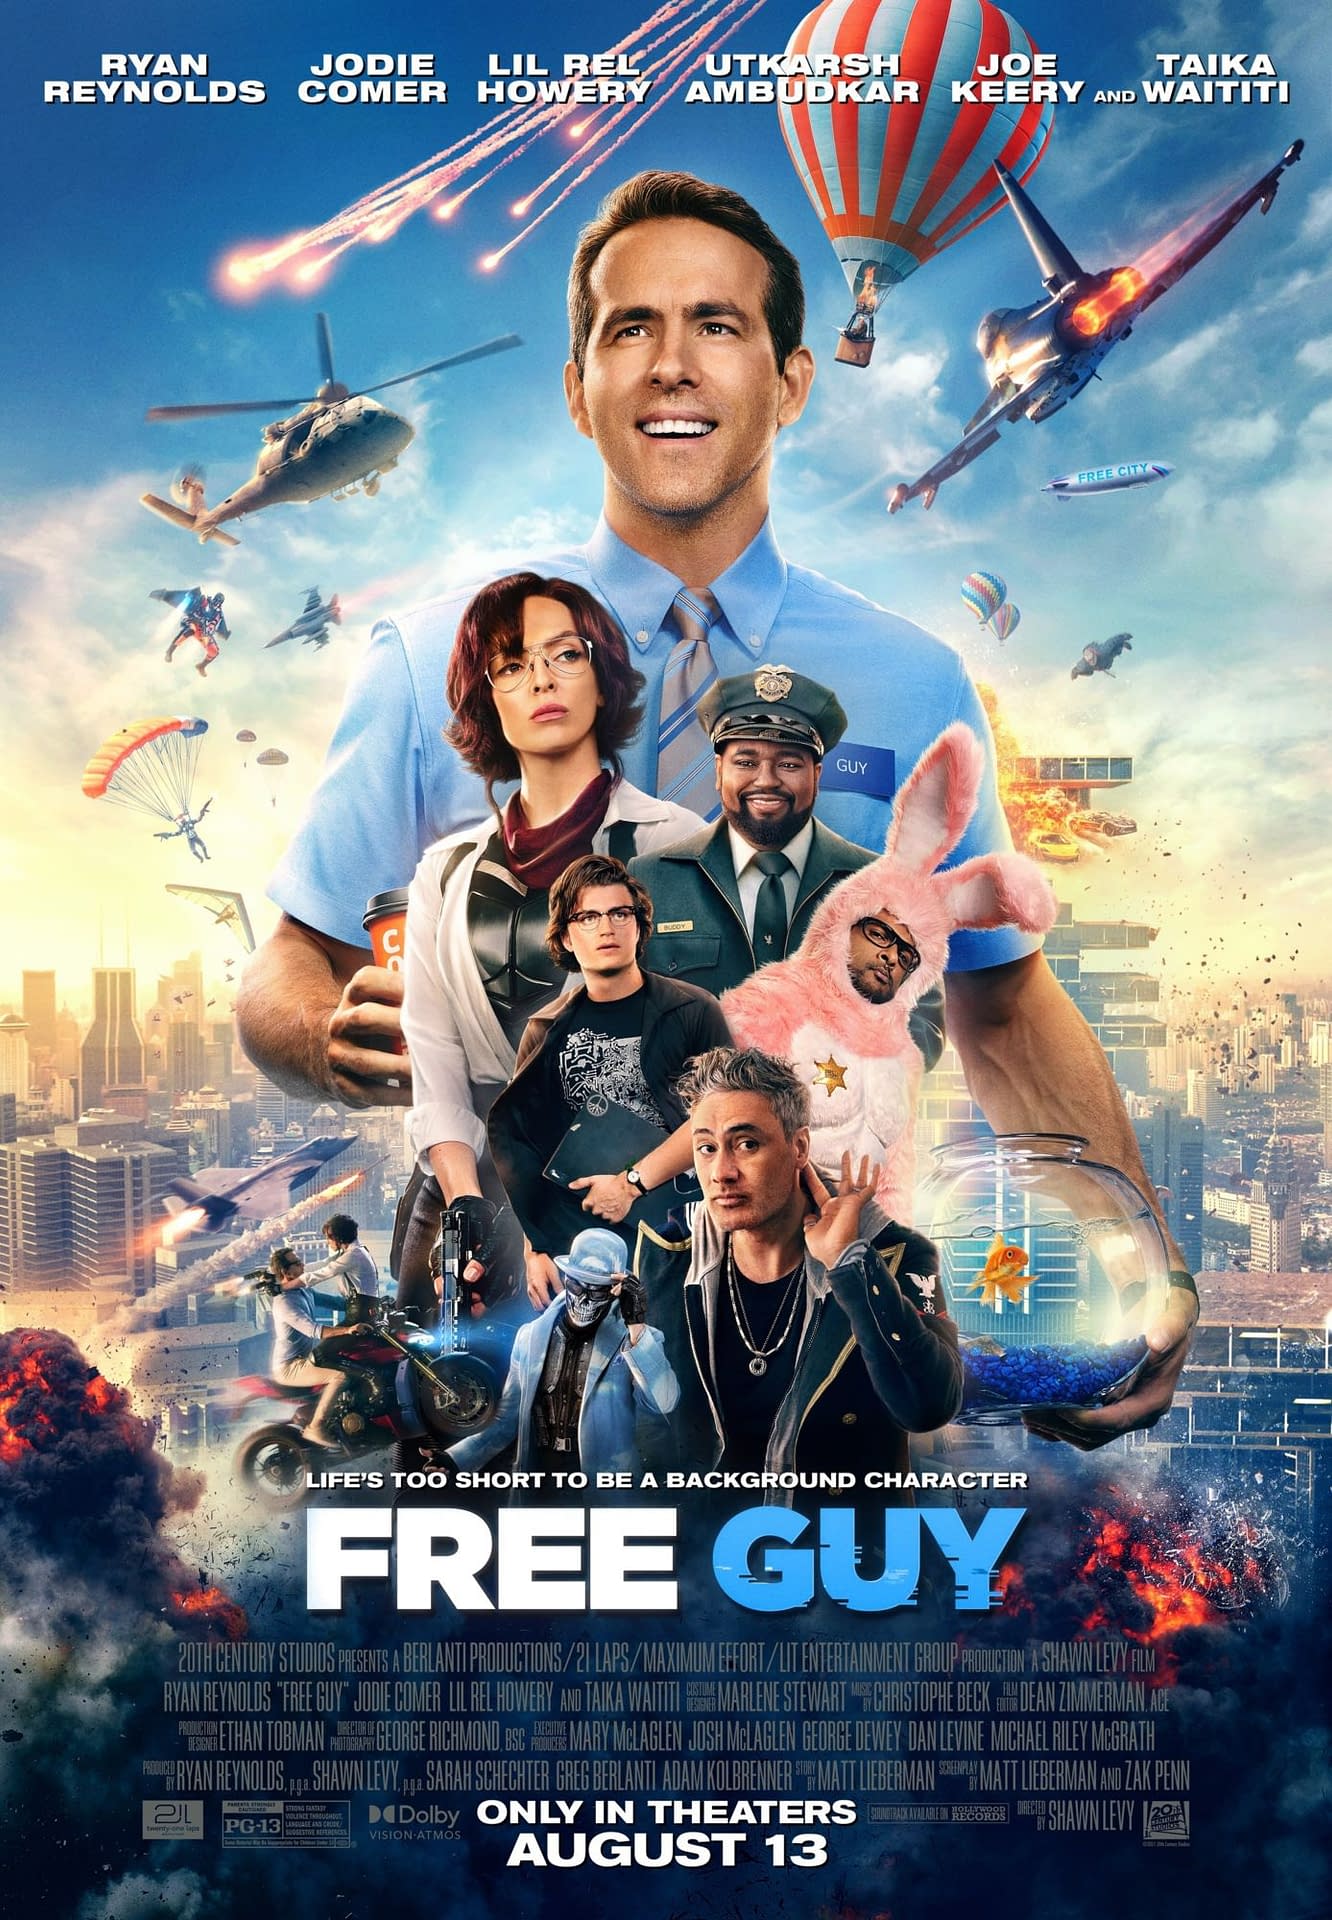 Movie Review: Free Guy a Fun, if Derivative, Wink at Gamer Culture